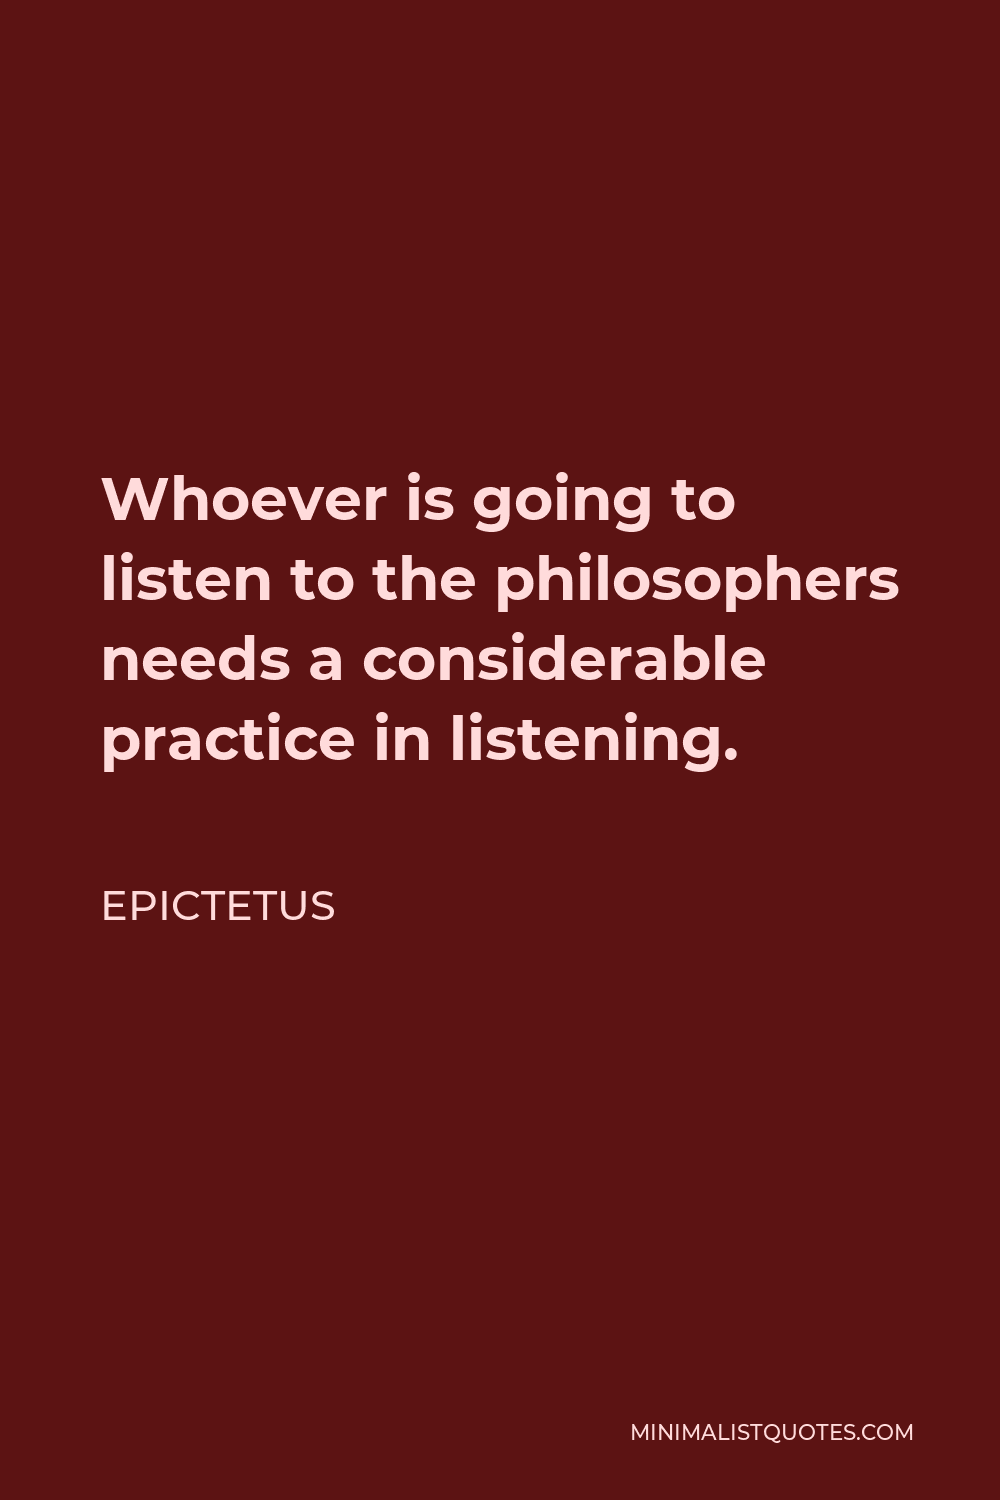 Epictetus Quote - Whoever is going to listen to the philosophers needs a considerable practice in listening.